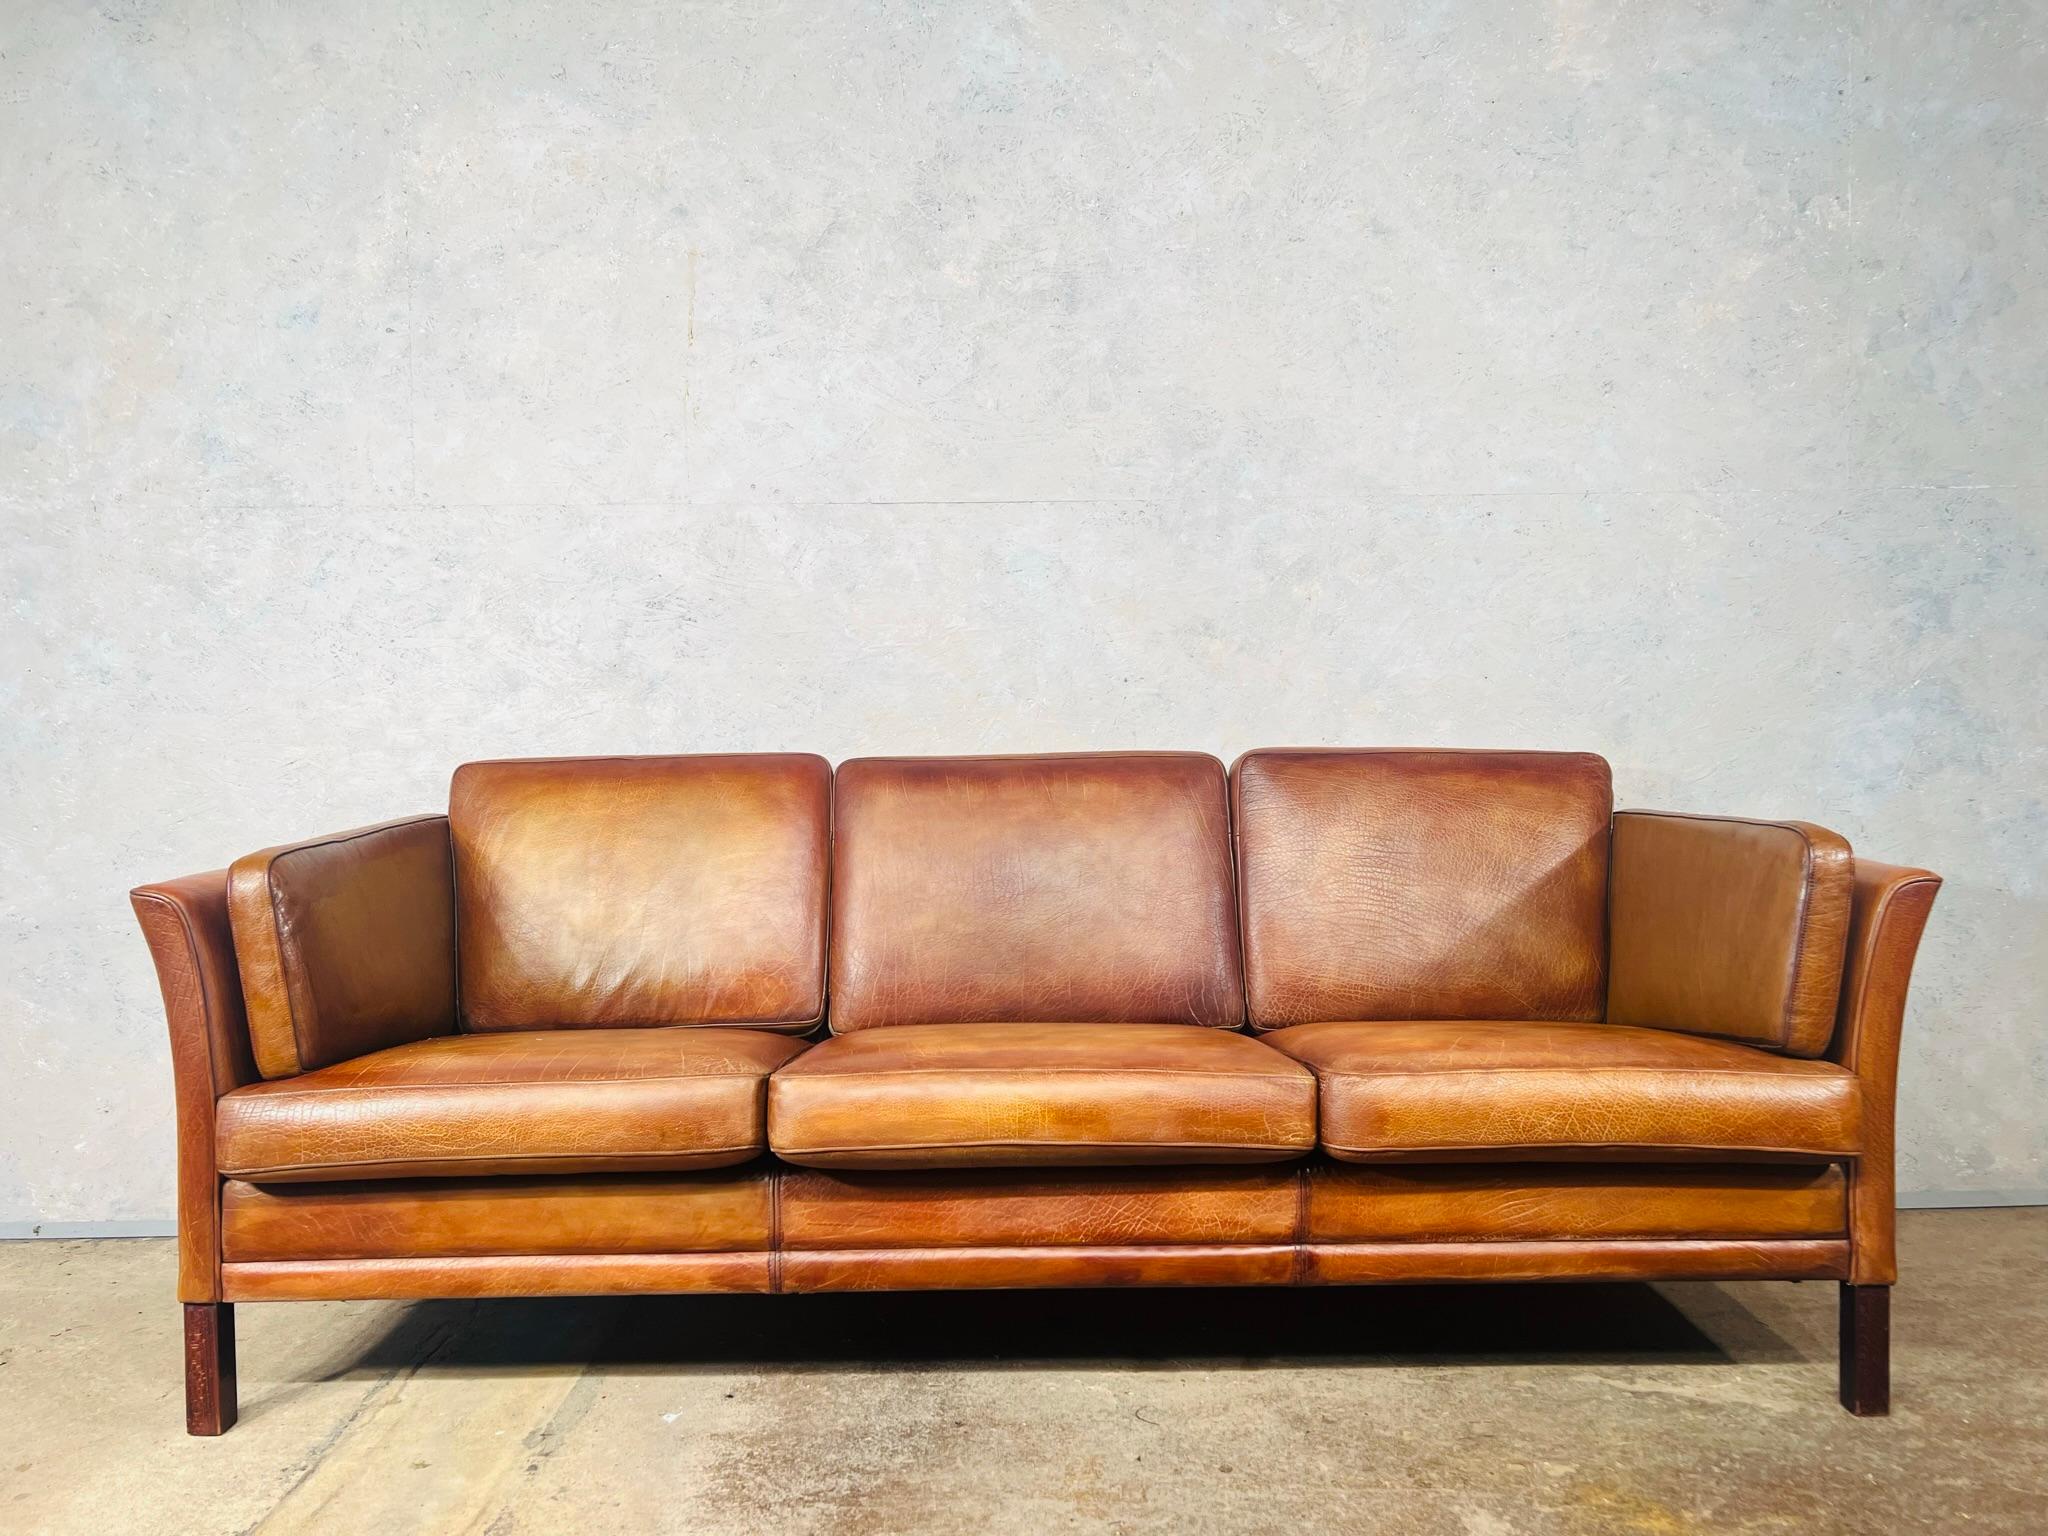 A Stylish 1970s Sofa designed by Mogens Hansen, great design with beautiful lines, sits wonderfully.

Stunning hand dyed light tan colour, great patina and finish. Great quality leather with a deep grain.

Viewings welcome at our showroom in